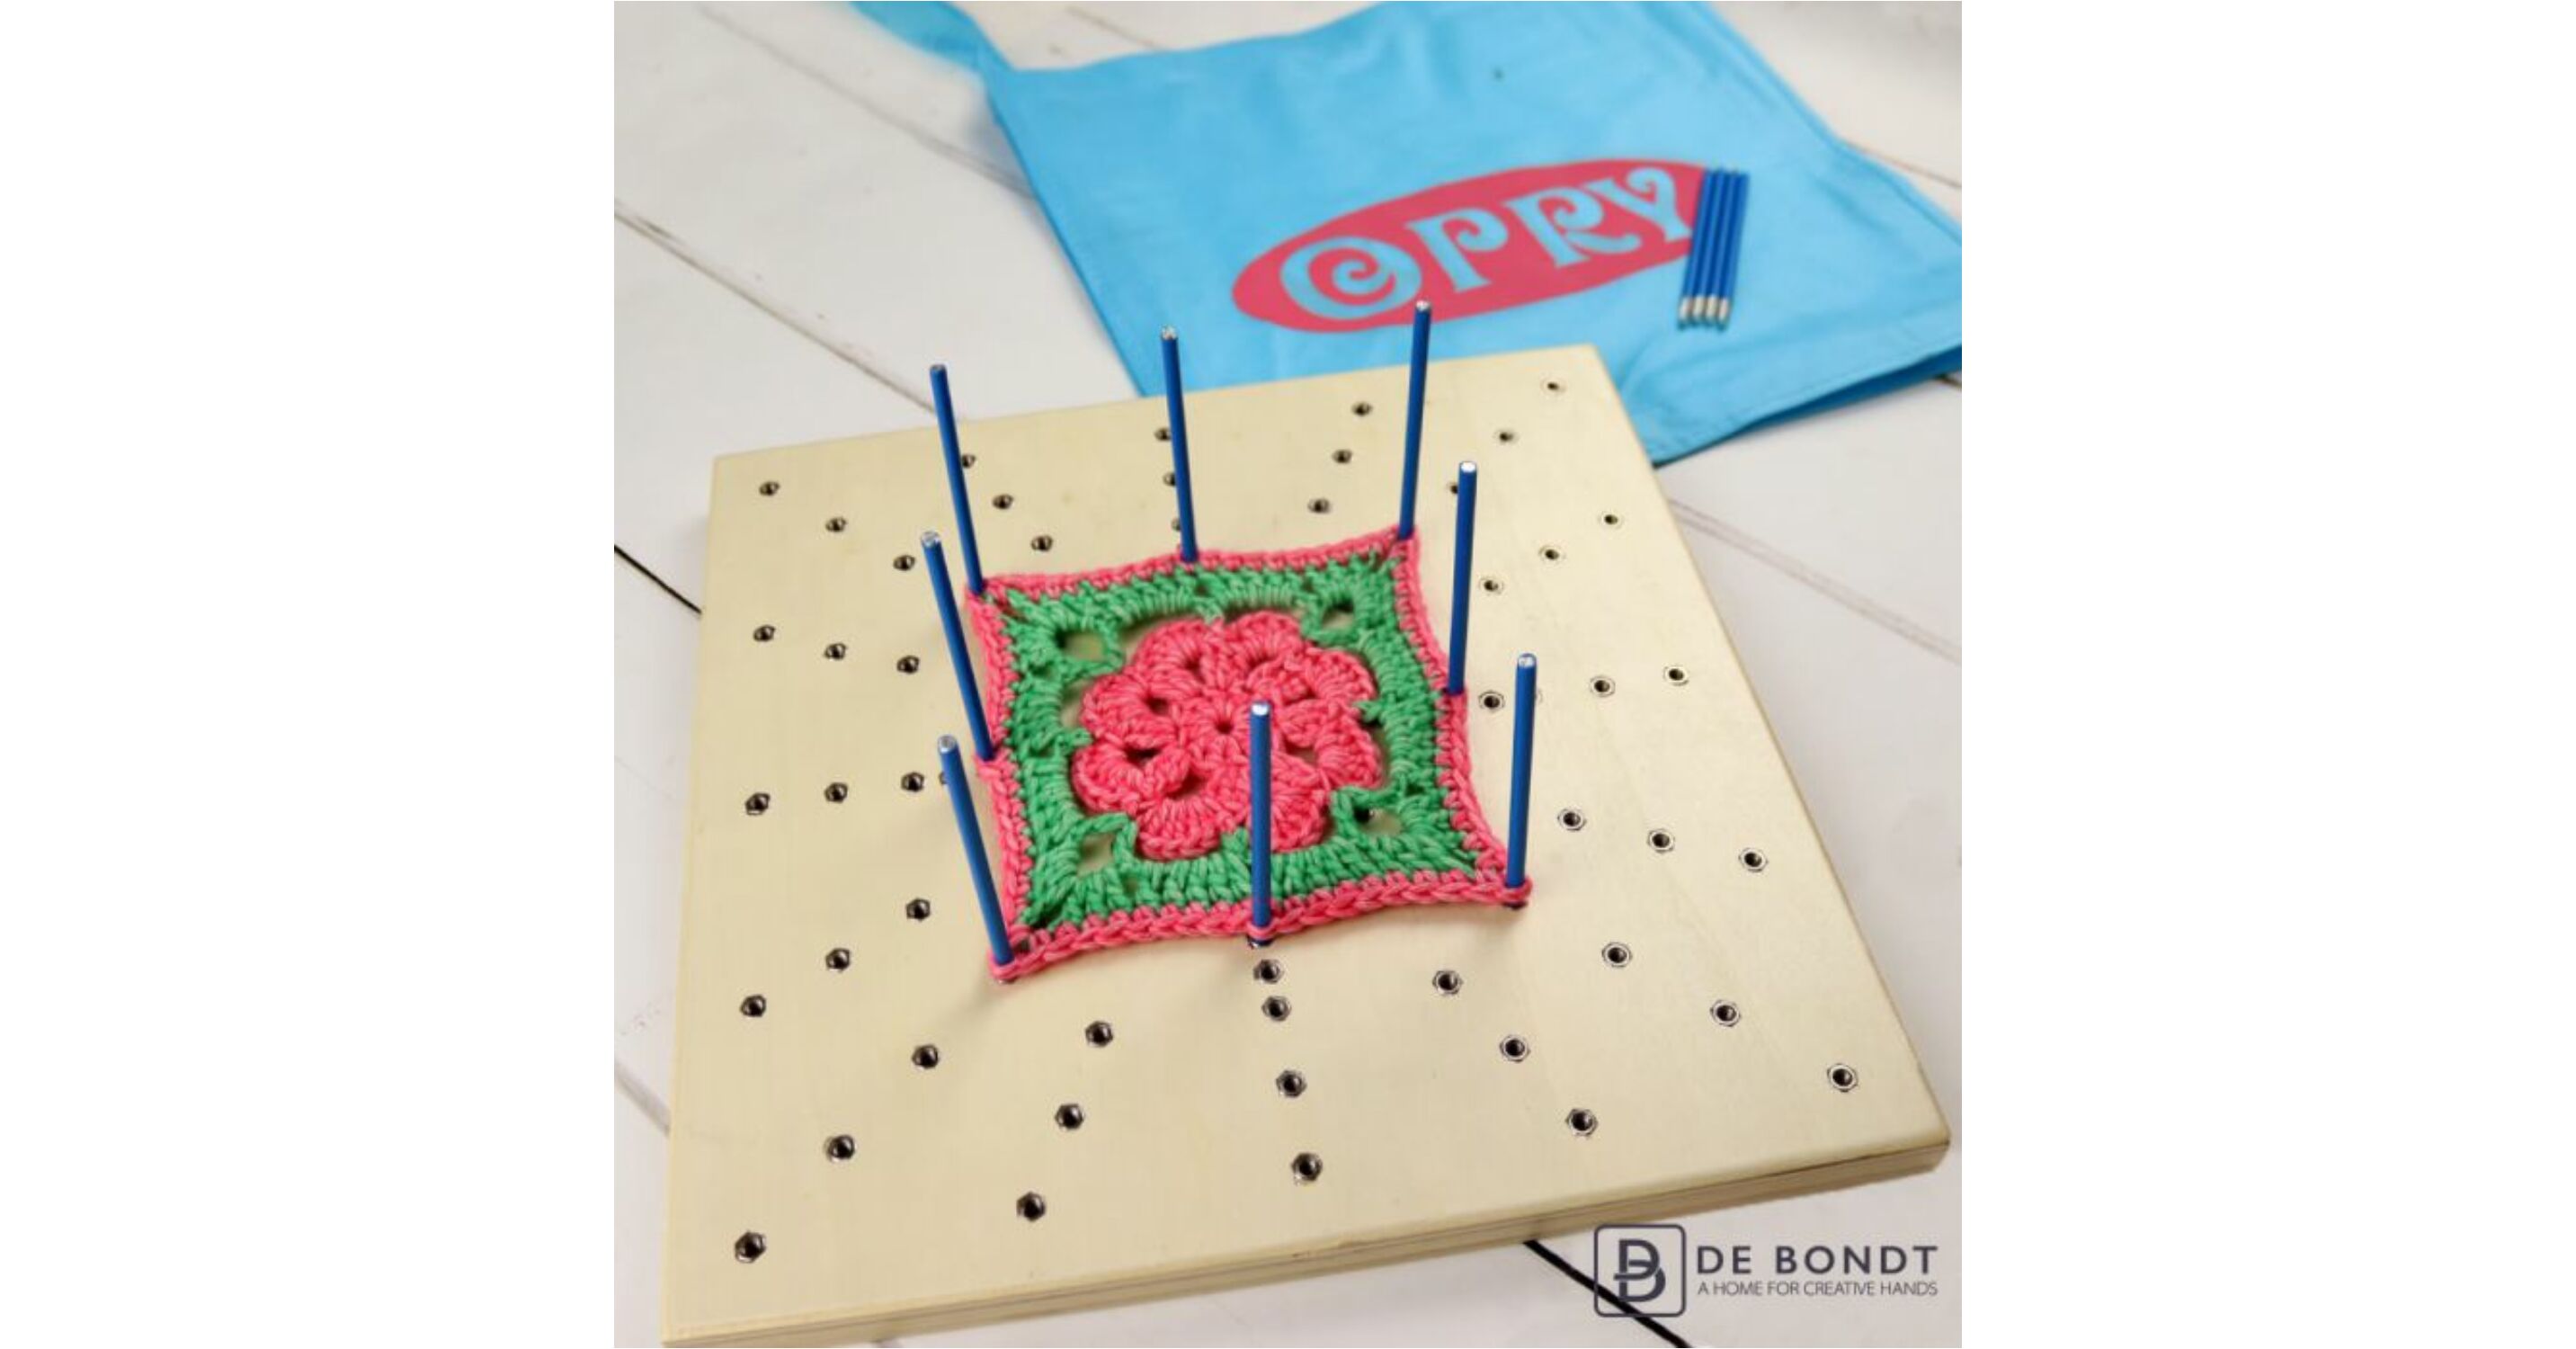 Opry Wooden Blocking Board - two-sided for crocheted granny squares